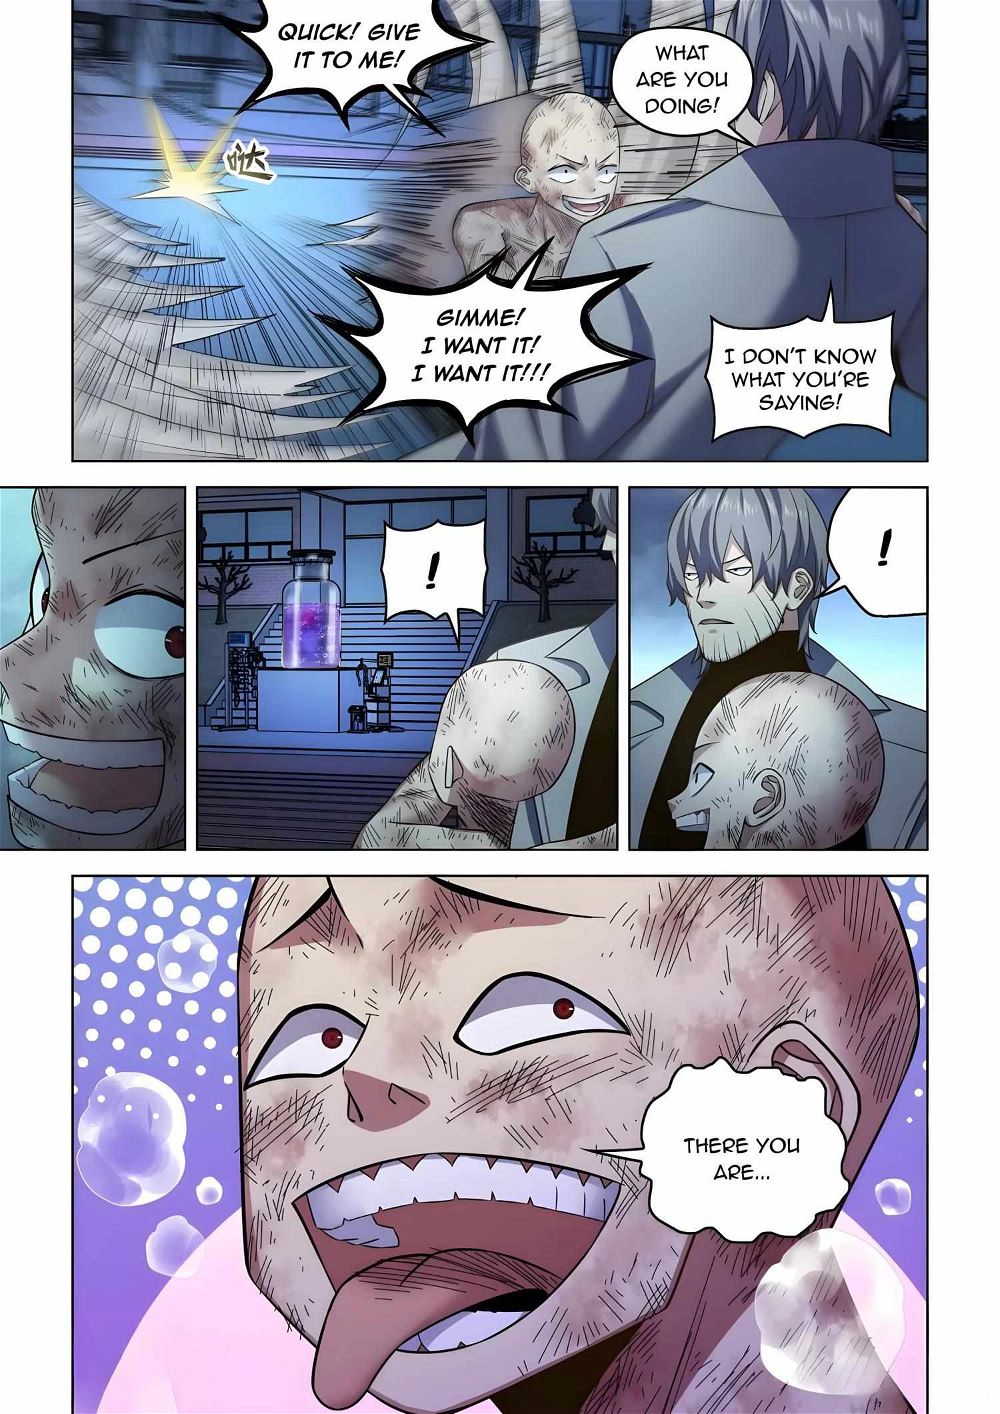 The Last Human Chapter 546 - Page 7